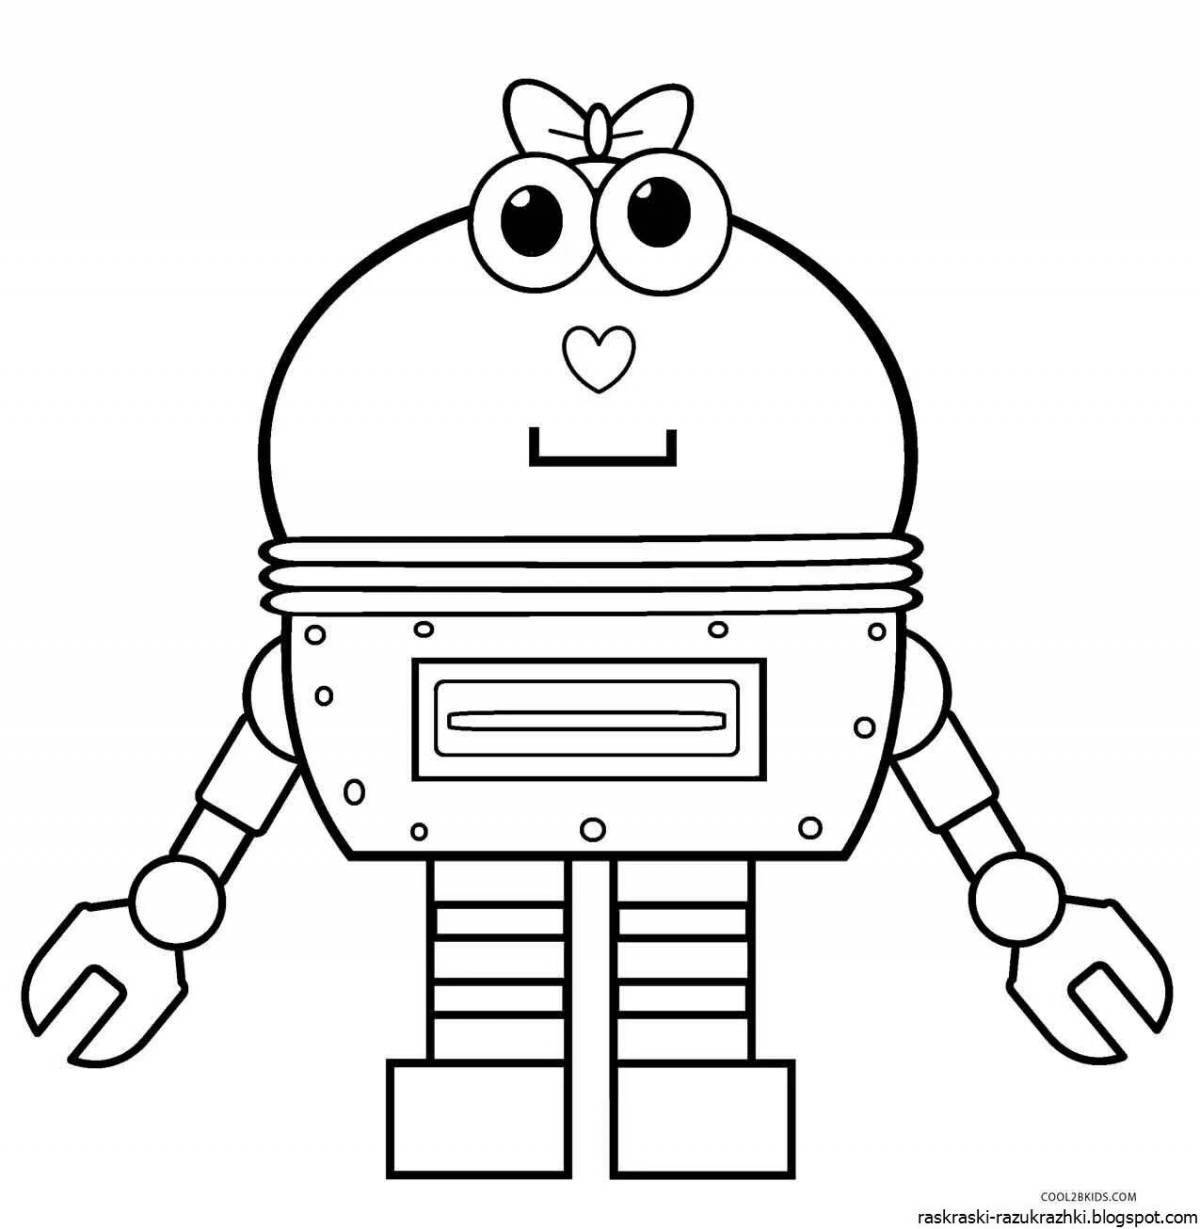 Coloring pages with playful robots for boys 5-6 years old